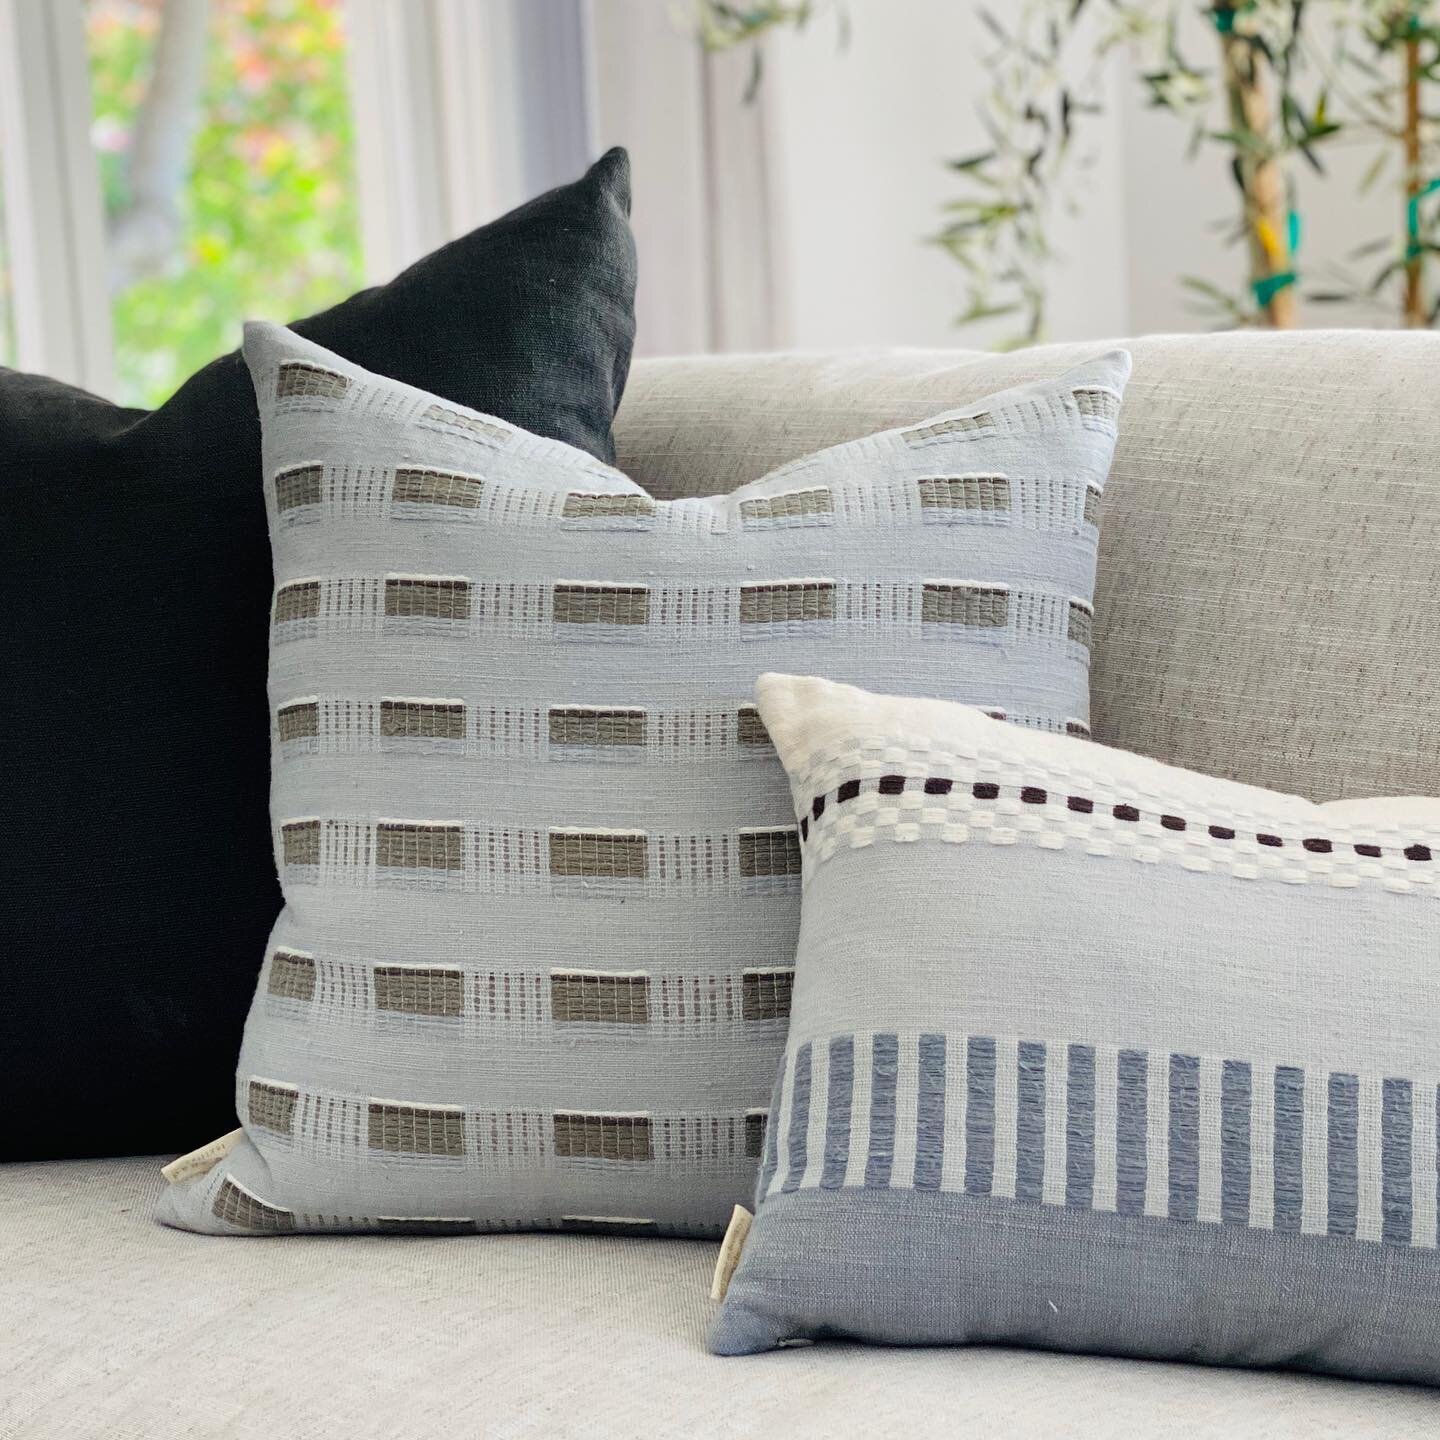 Gorgeous pillows by @boleroadtextiles found at the always inspirational @shopmcmullen